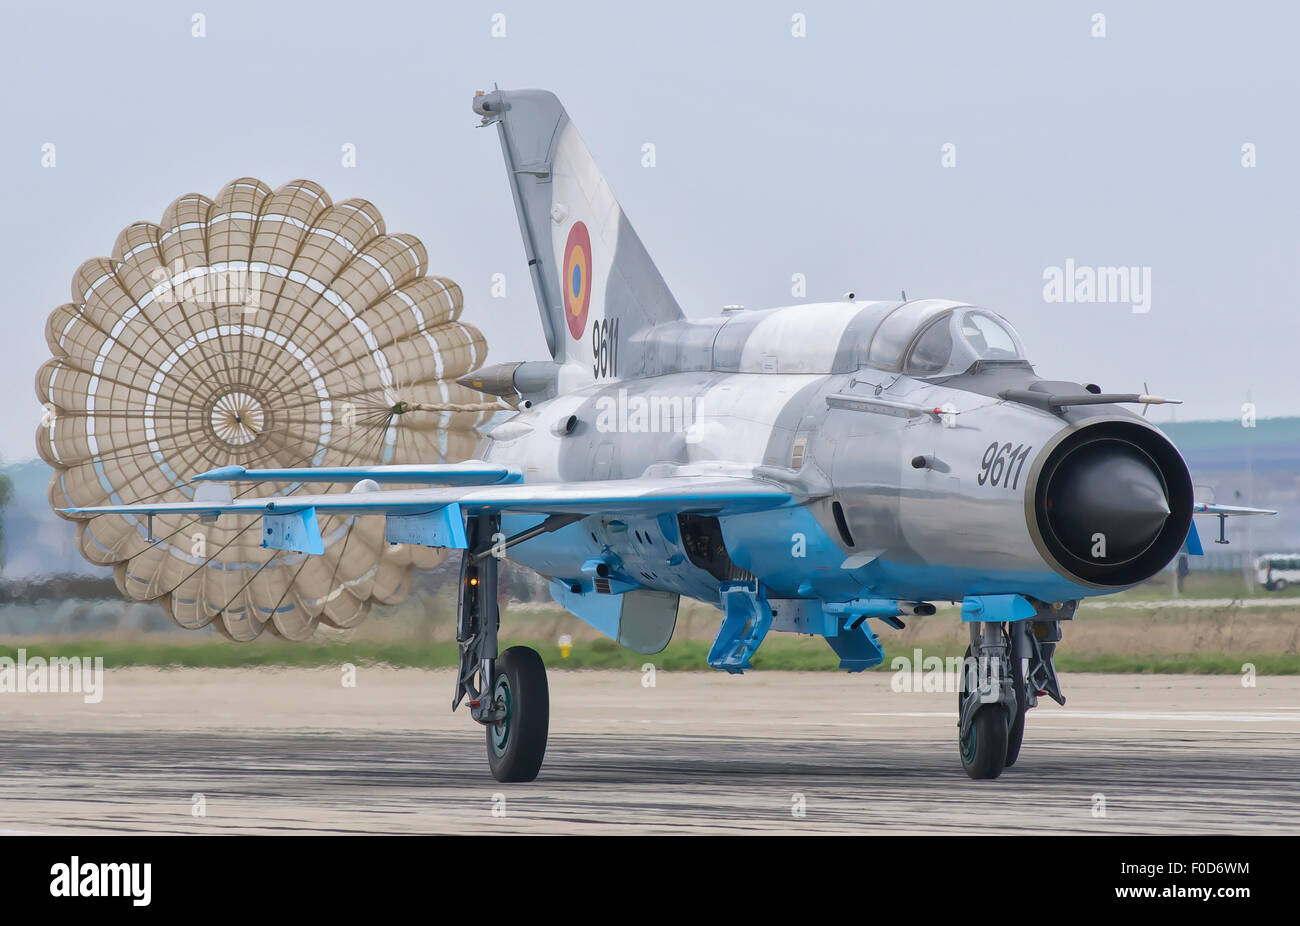 A Romanian Air Force MiG-21C with parachute deployed at Camp Turzii Air Base, Romania. Stock Photo